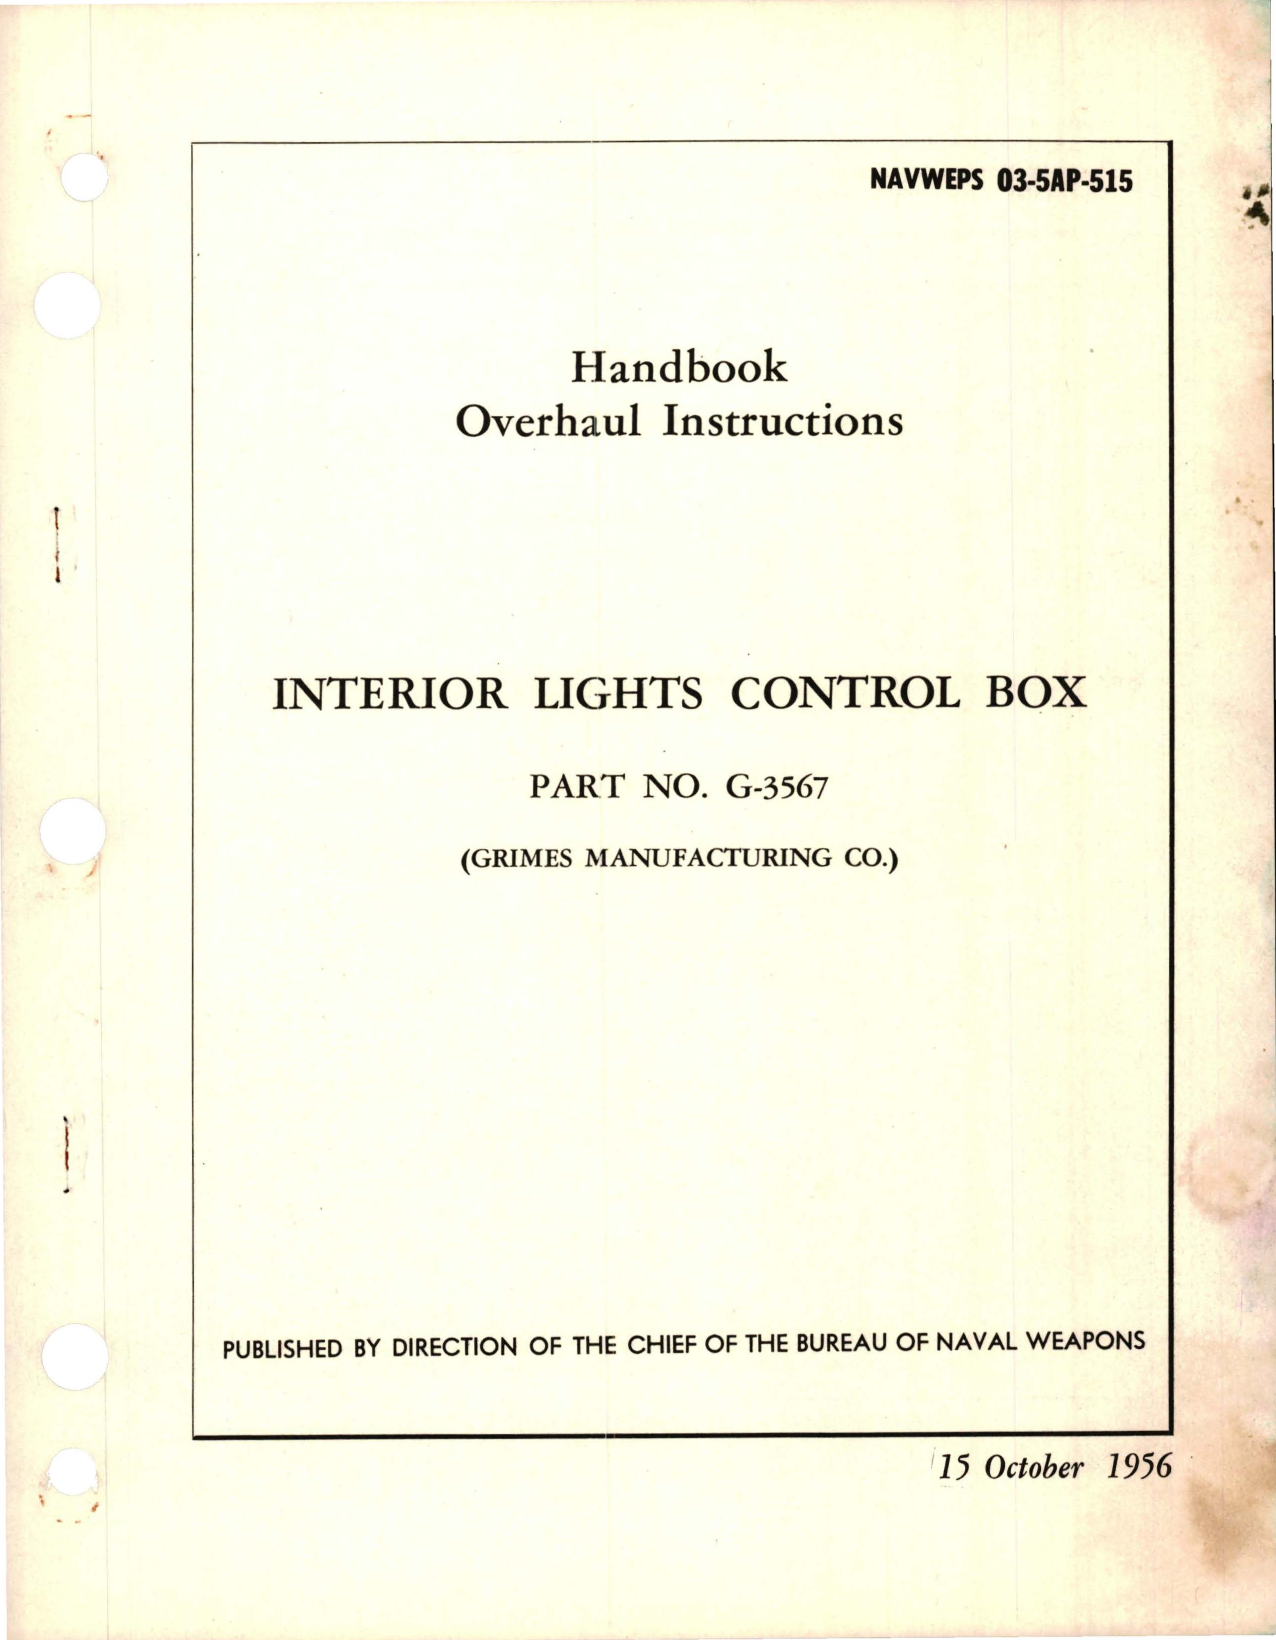 Sample page 1 from AirCorps Library document: Overhaul Instructions for Interior Lights Control Box - Part G-3567 